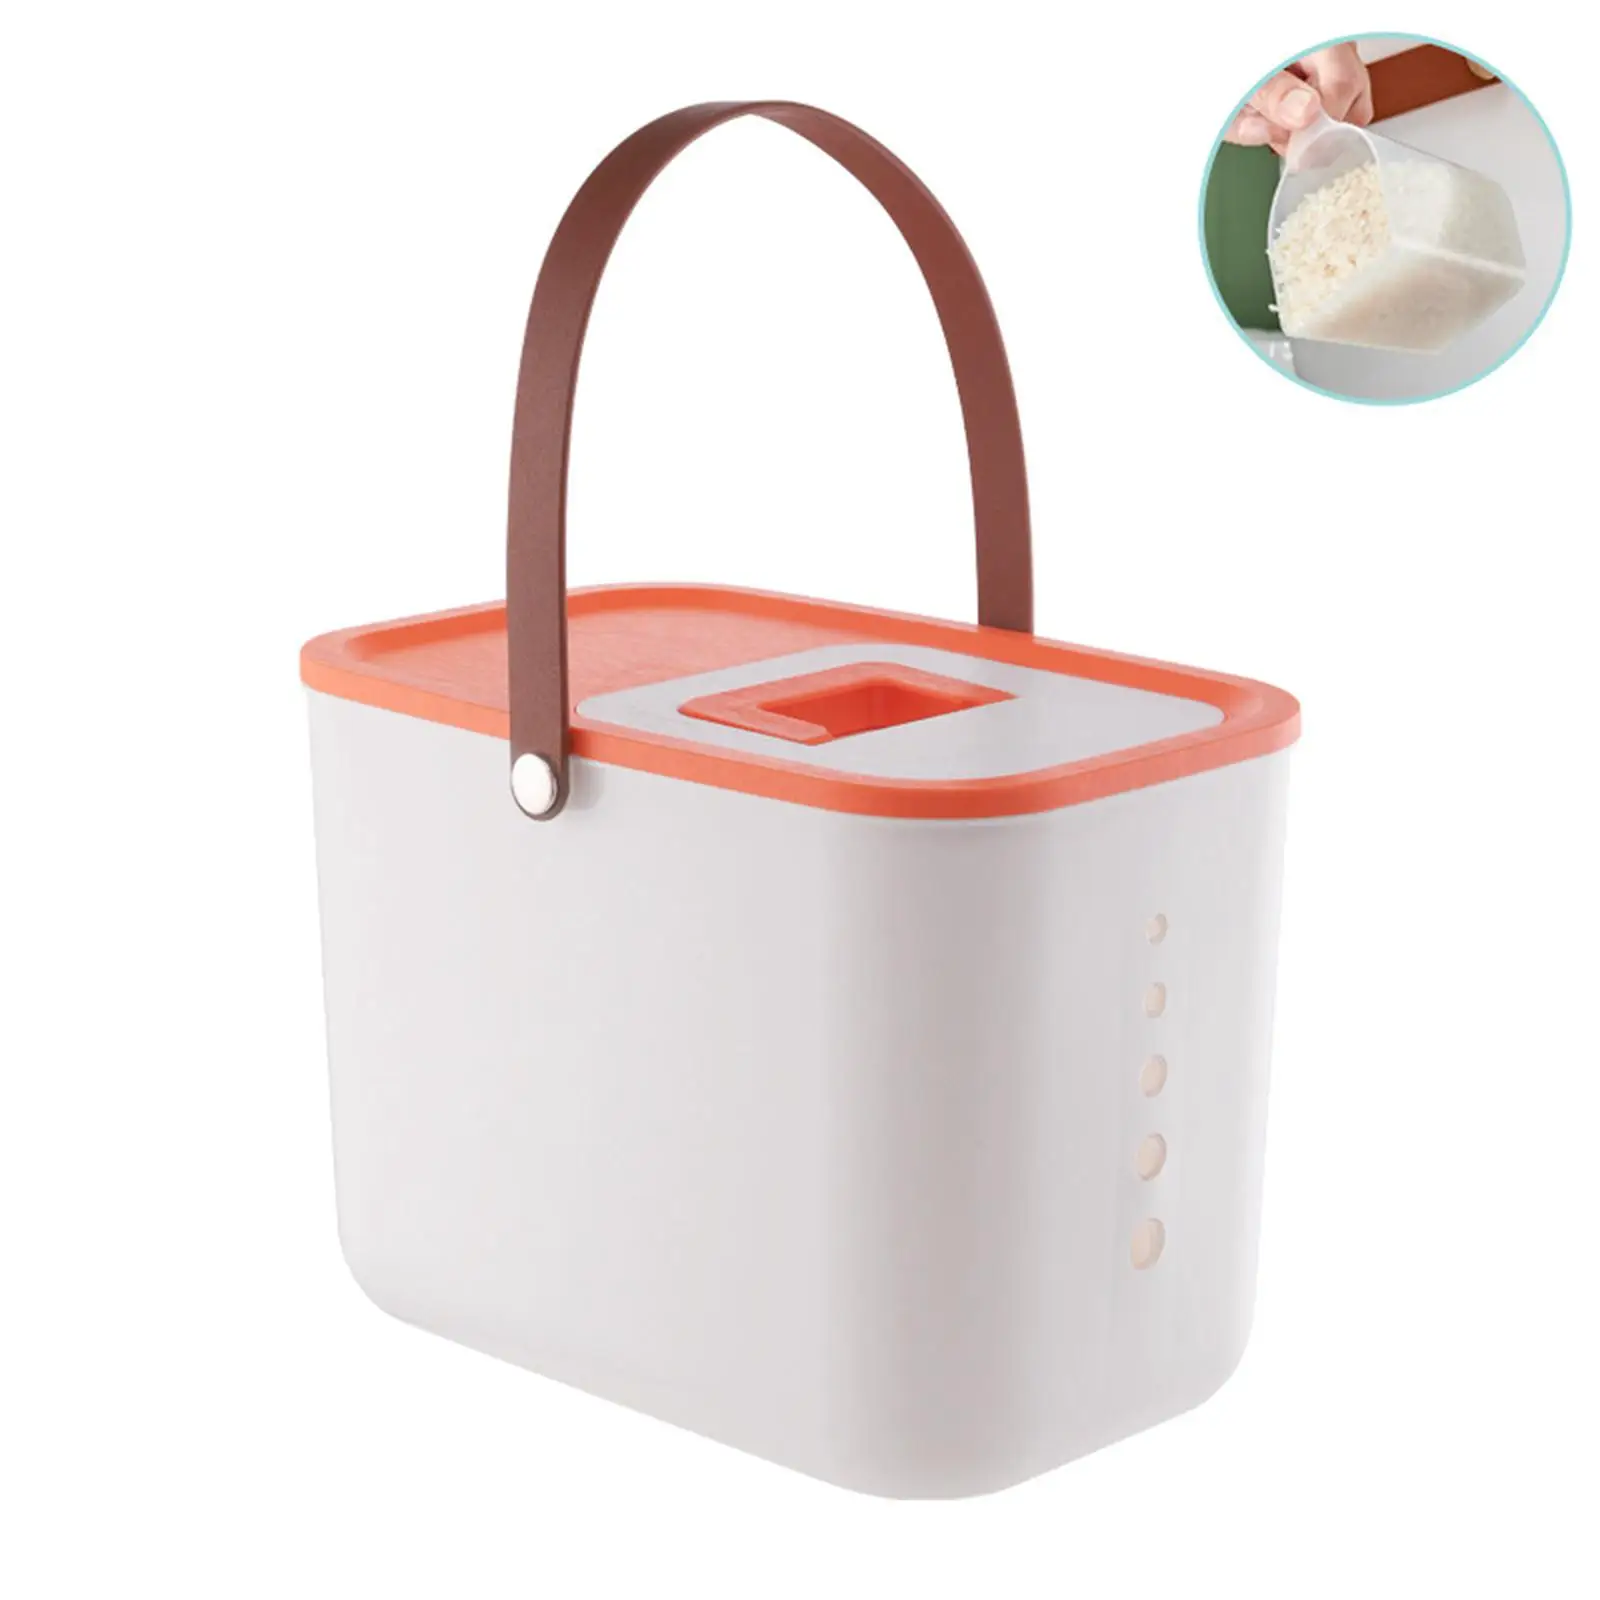 Rice Container Multifunctional Large 25kg with scoop & Handles Cereal Rice Tank Sealed Bucket Bins BPA Free Candy wheat Can